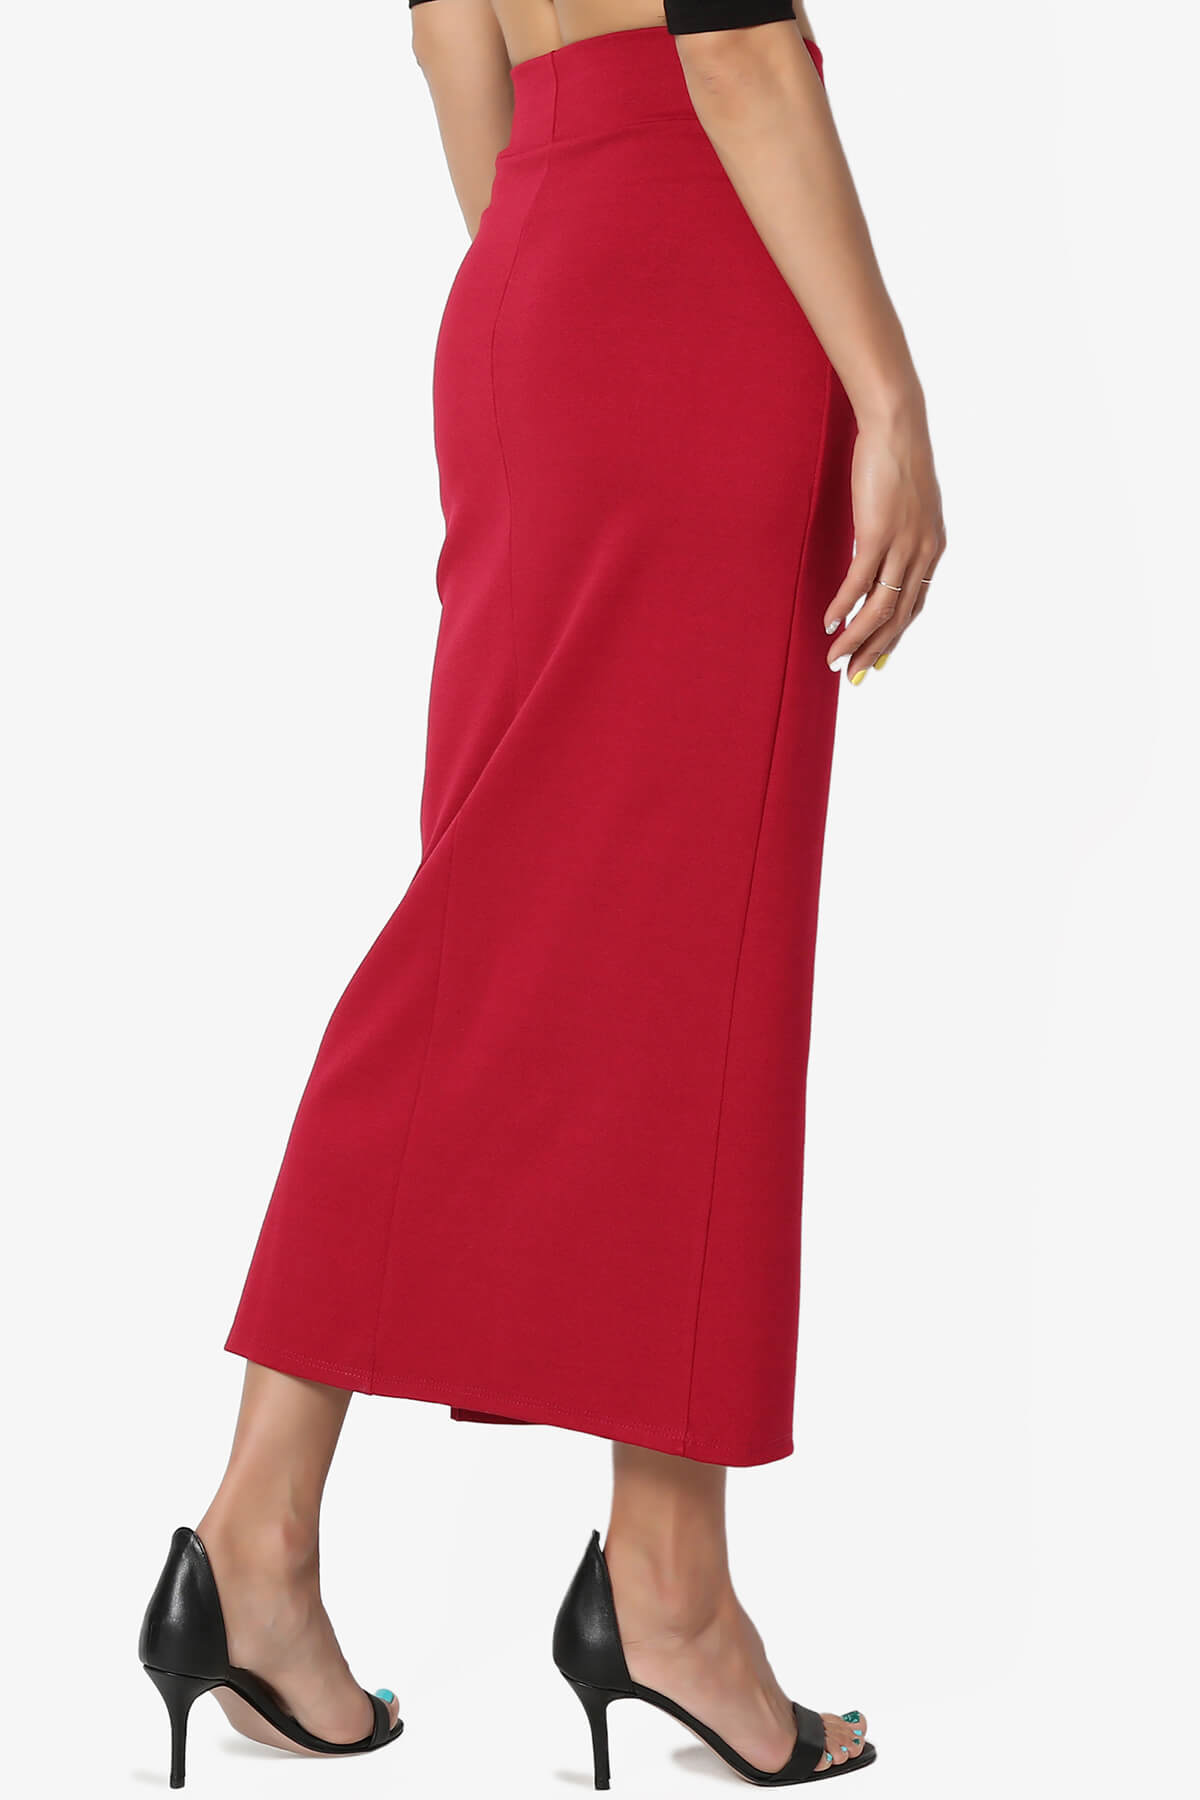 Load image into Gallery viewer, Carleta Mid Calf Pencil Skirt RED_4
